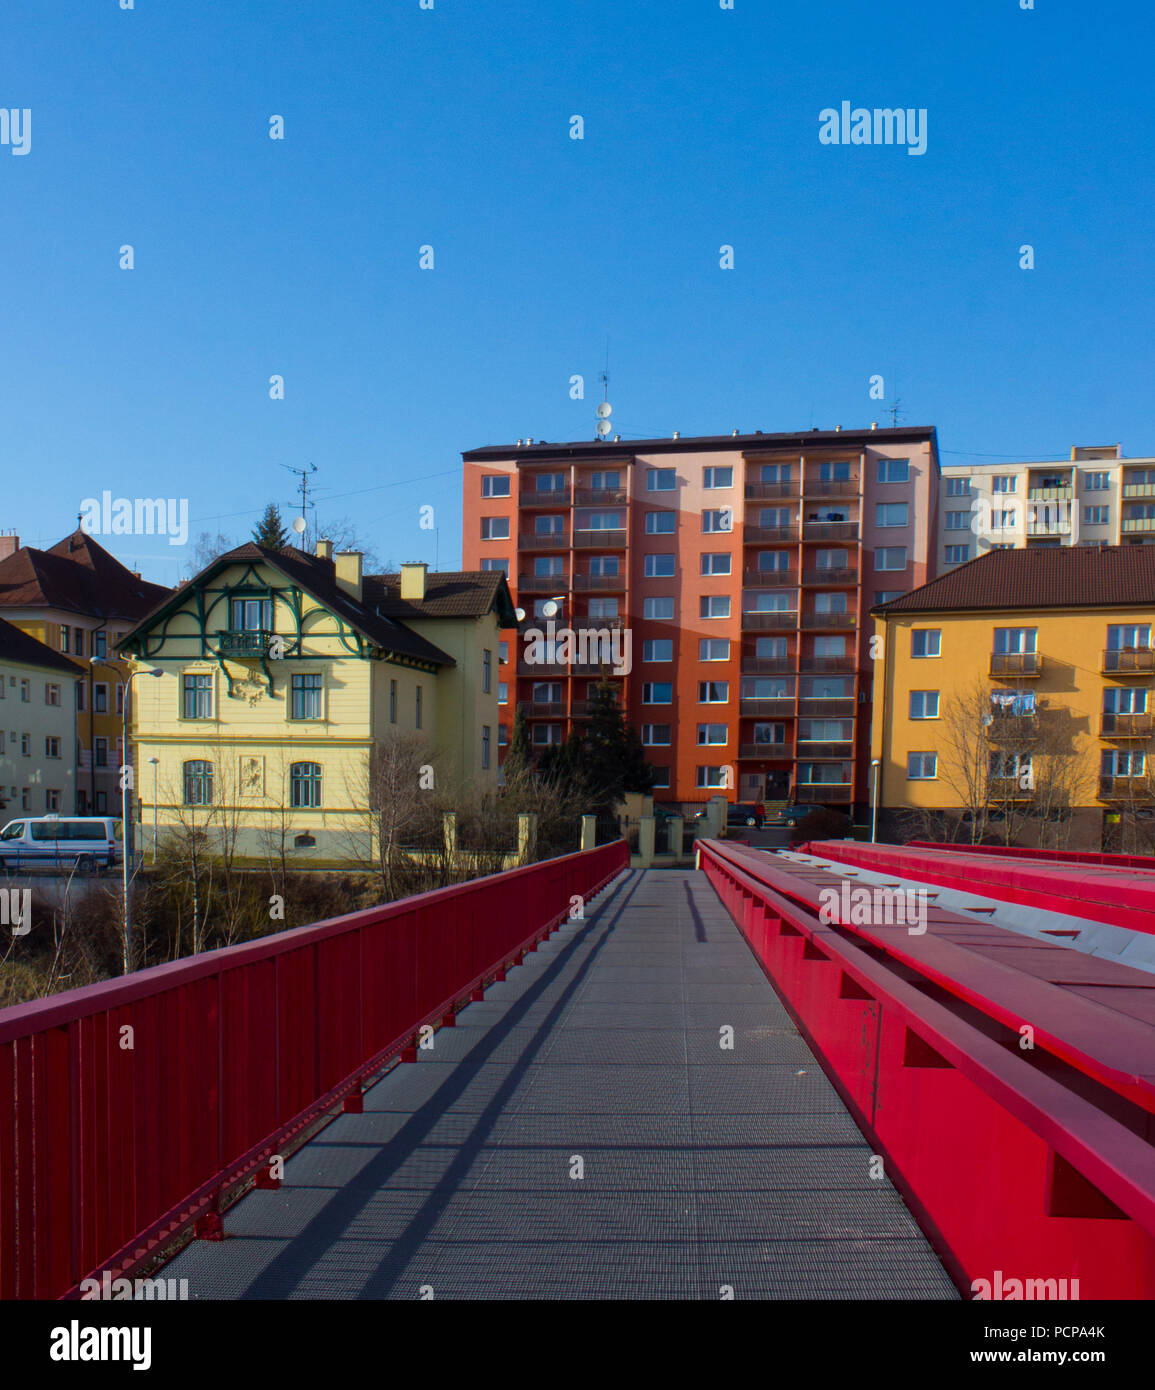 Metallic red bridge over the railway in Frydek Mistek in the Czech Republic. In the background is the colored block of flats. Stock Photo